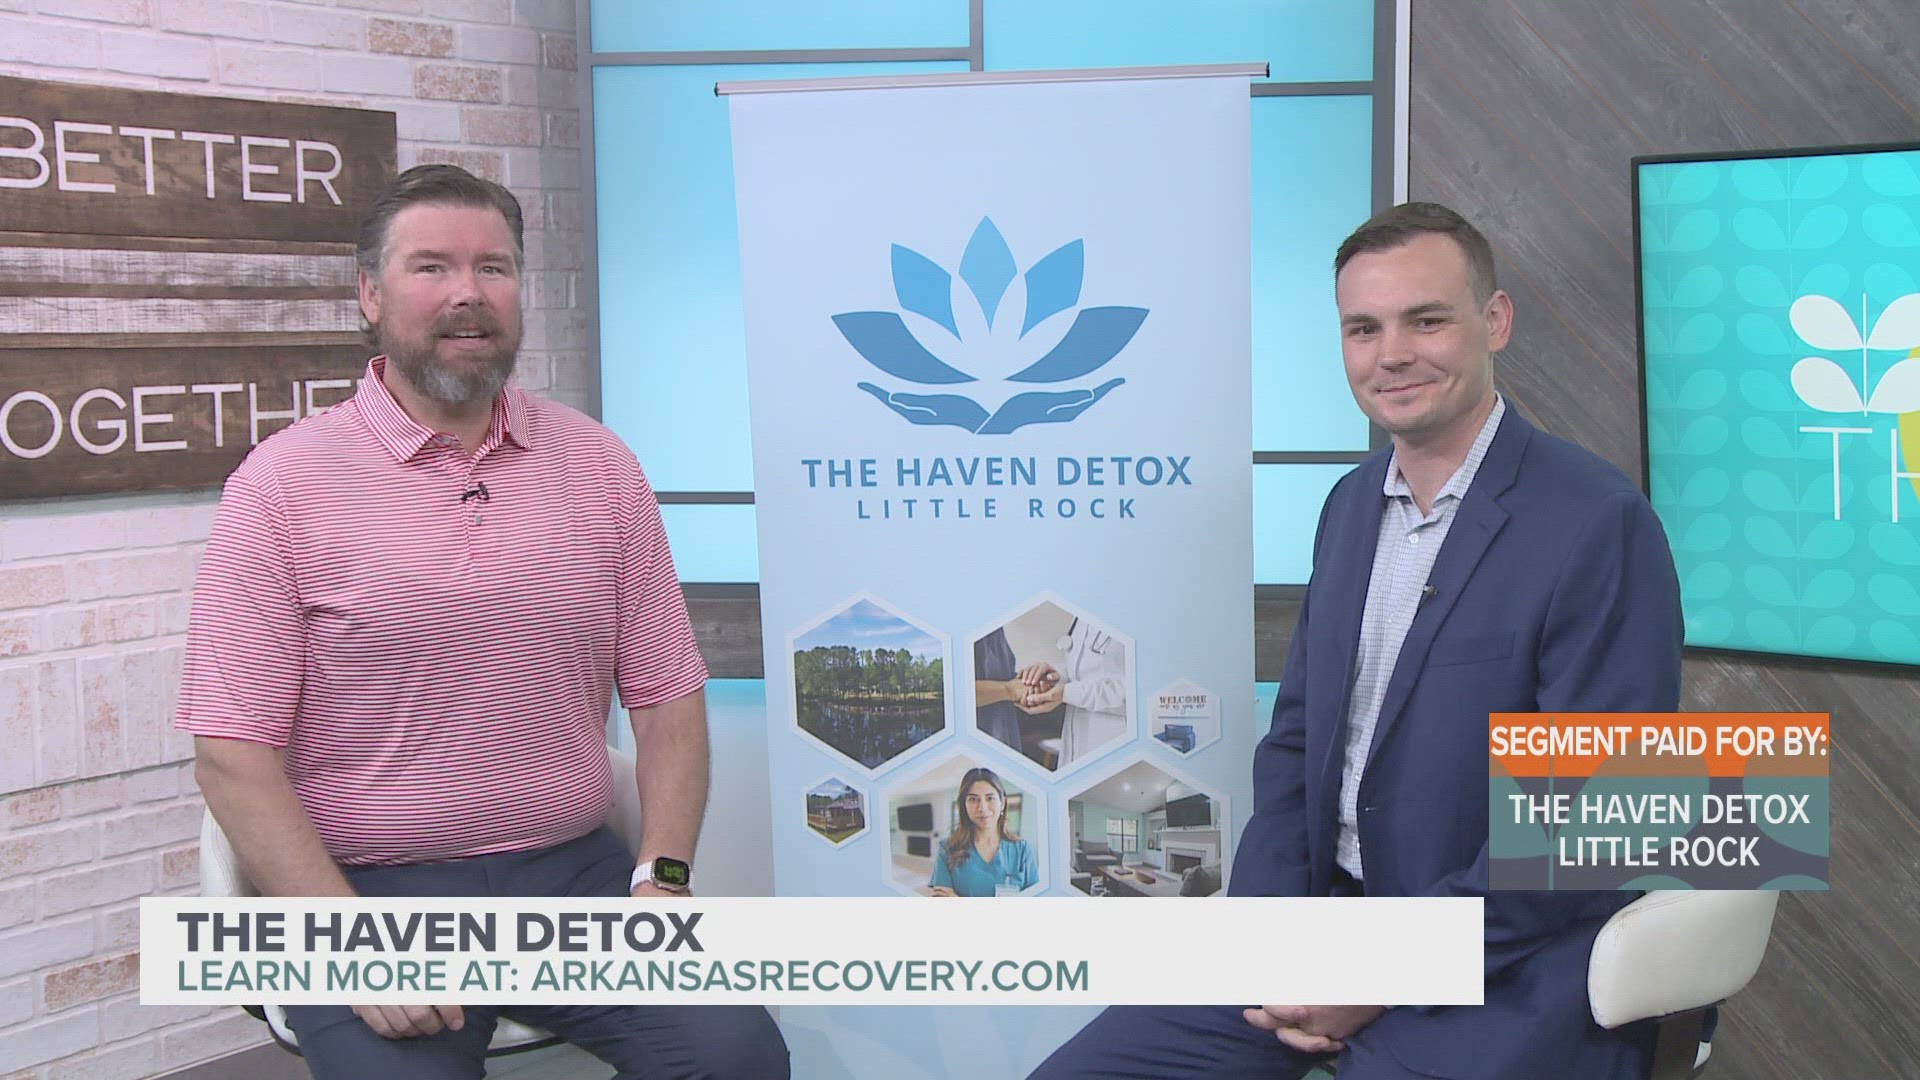 The Haven Detox Little Rock is a detox and residential treatment program for those struggling with substance abuse. Learn more at arkansasrecovery.com!